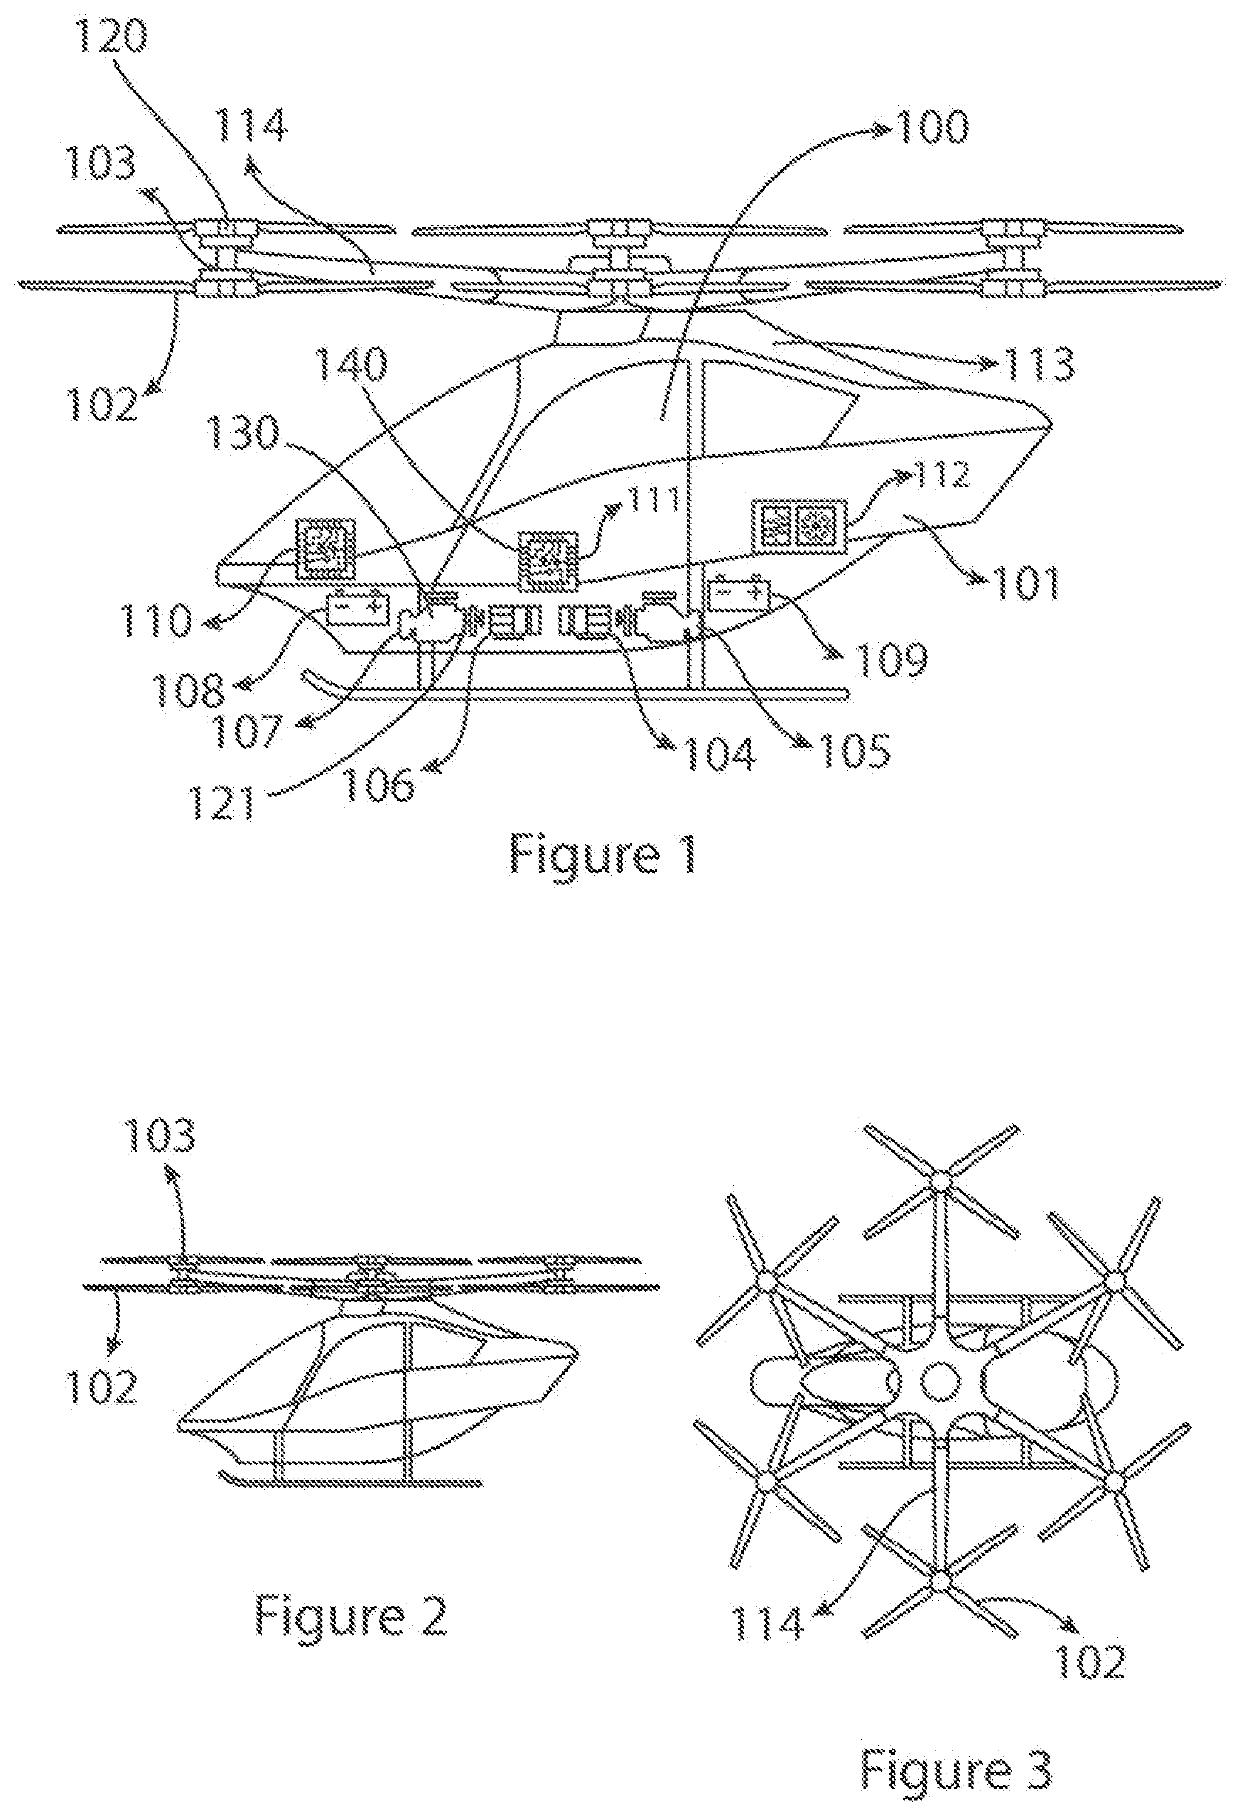 A propulsion system for a multirotor aircraft